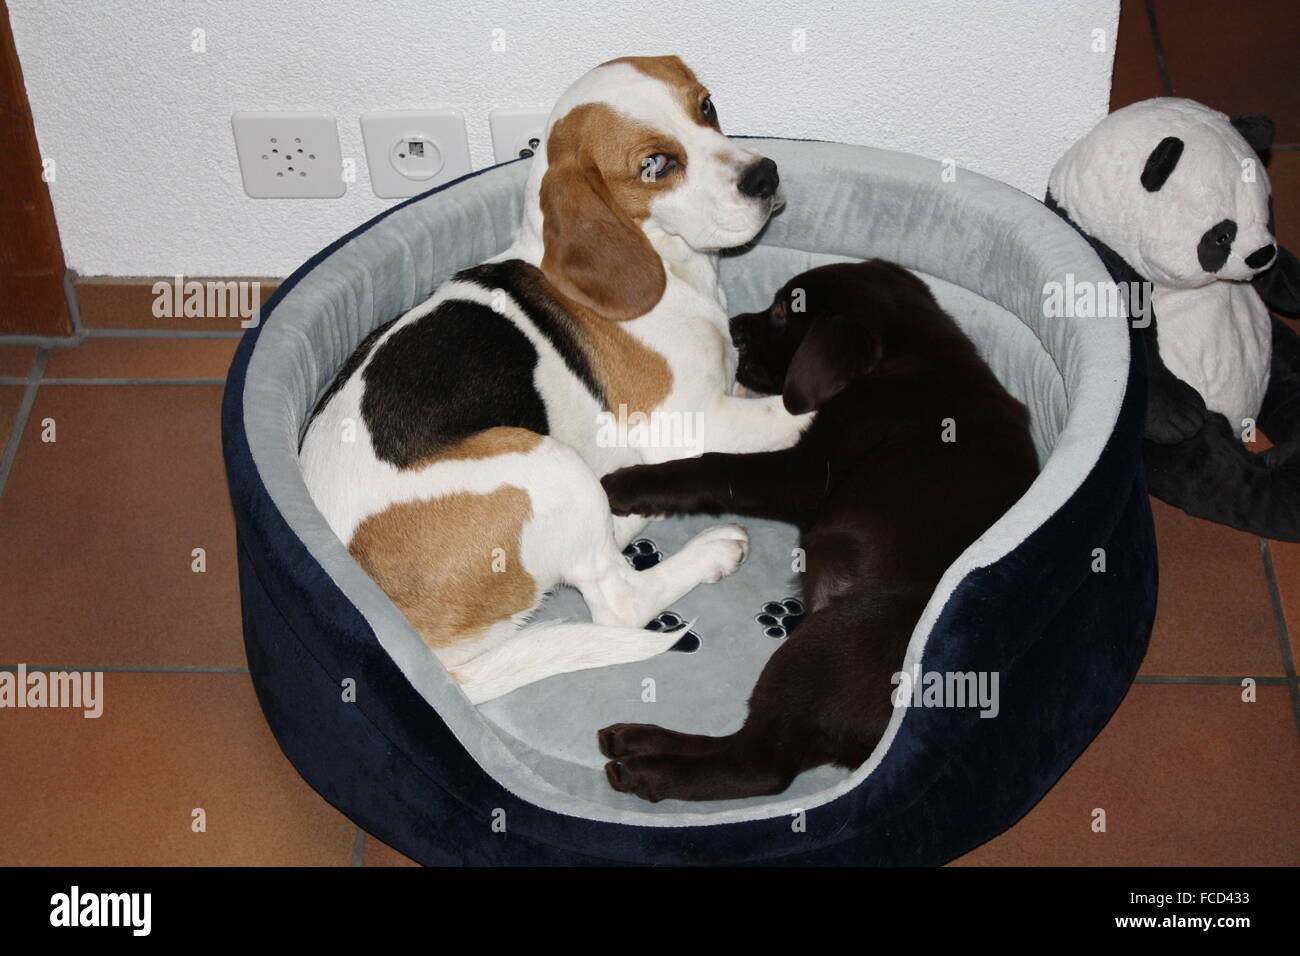 Two Cute Dogs In A Comfortable Dog Bed Indoor Stock Photo